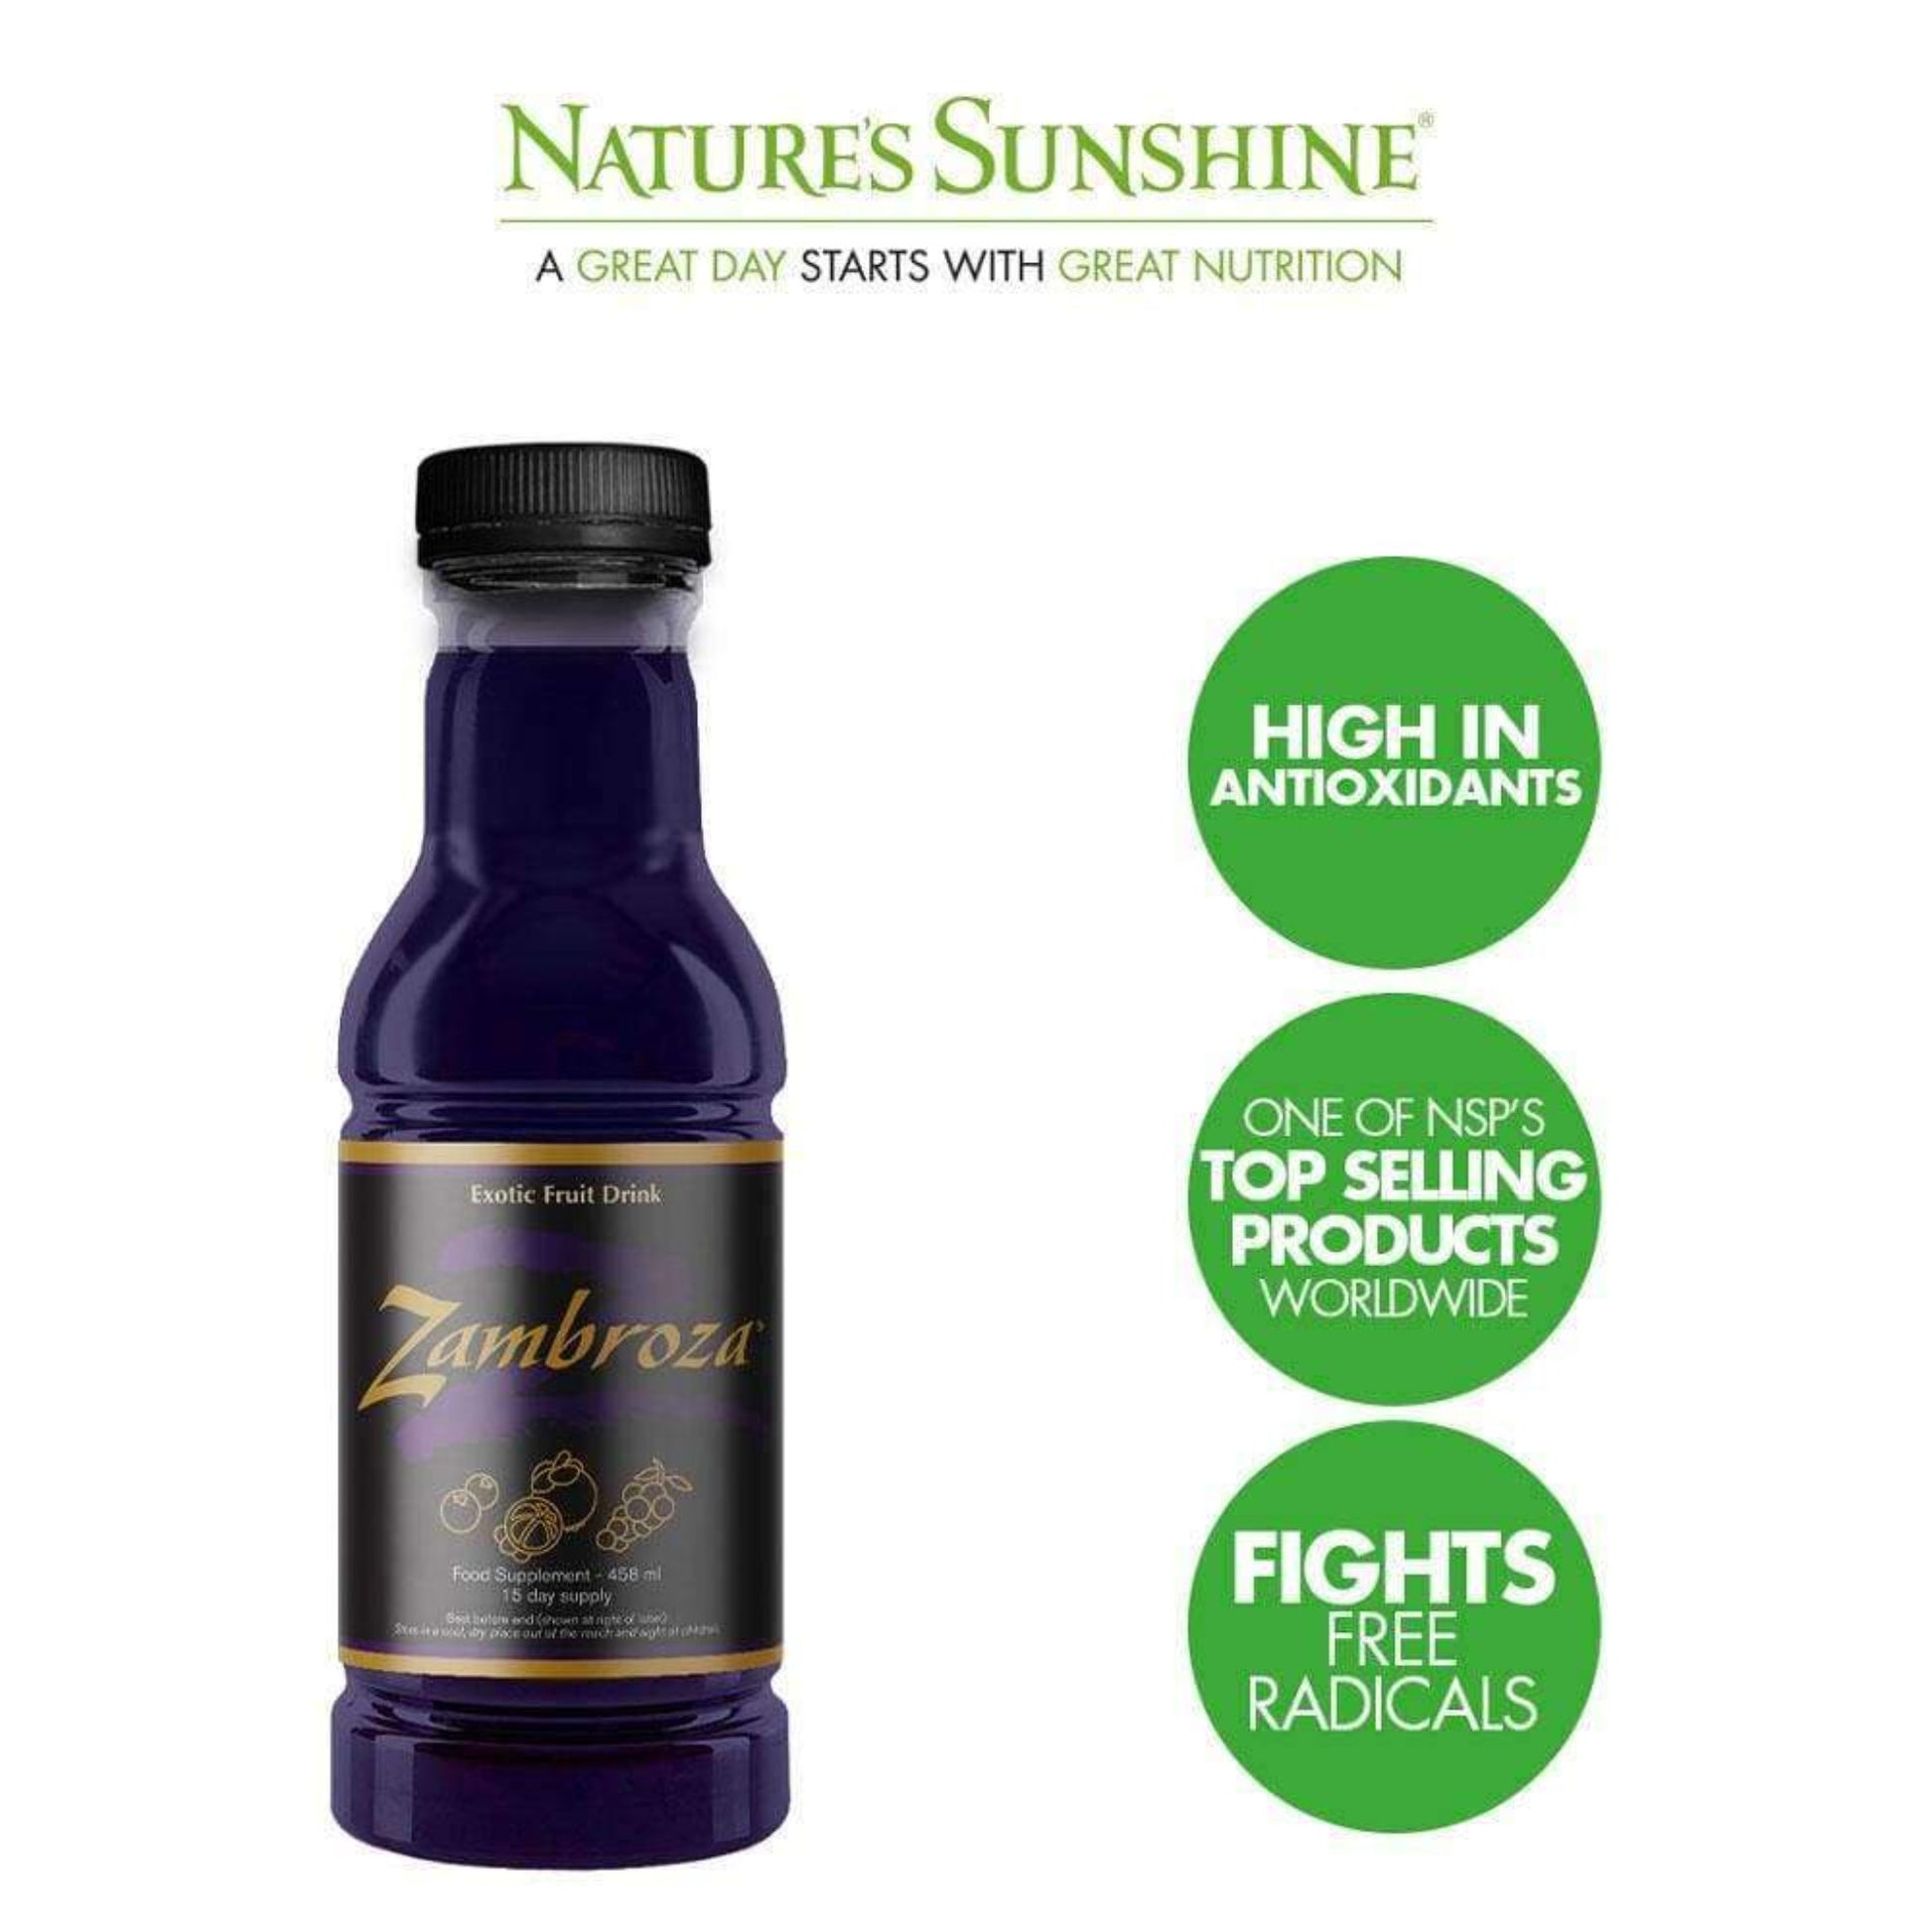  Zambroza® by Nature's Sunshine, high in antioxidants to help fight free radicals